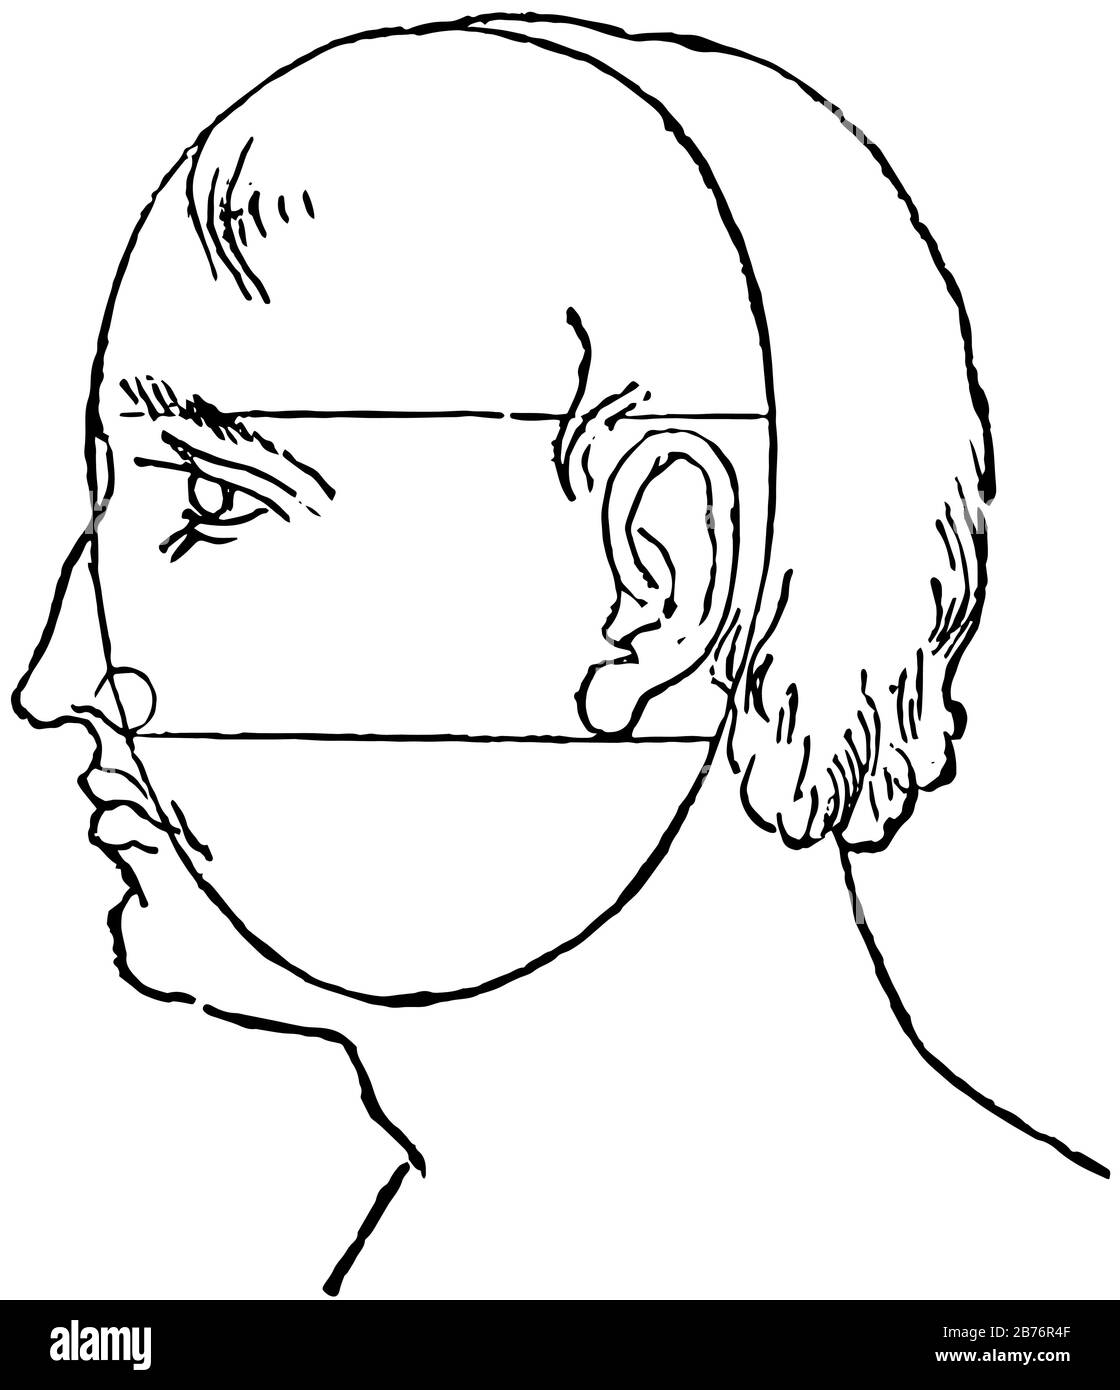 Face Perspective is simplify the head into its basic forms, it is drawn realistically is drawing with the laws of perspective, vintage line drawing or Stock Vector